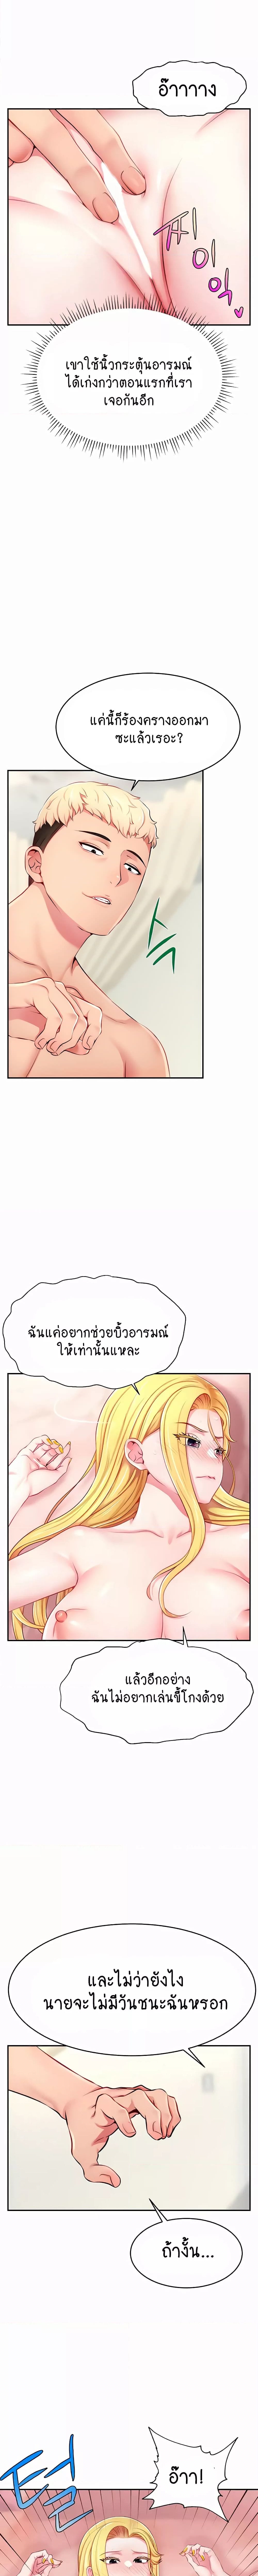 Making Friends With Streamers by Hacking! ตอนที่ 5 ภาพ 2